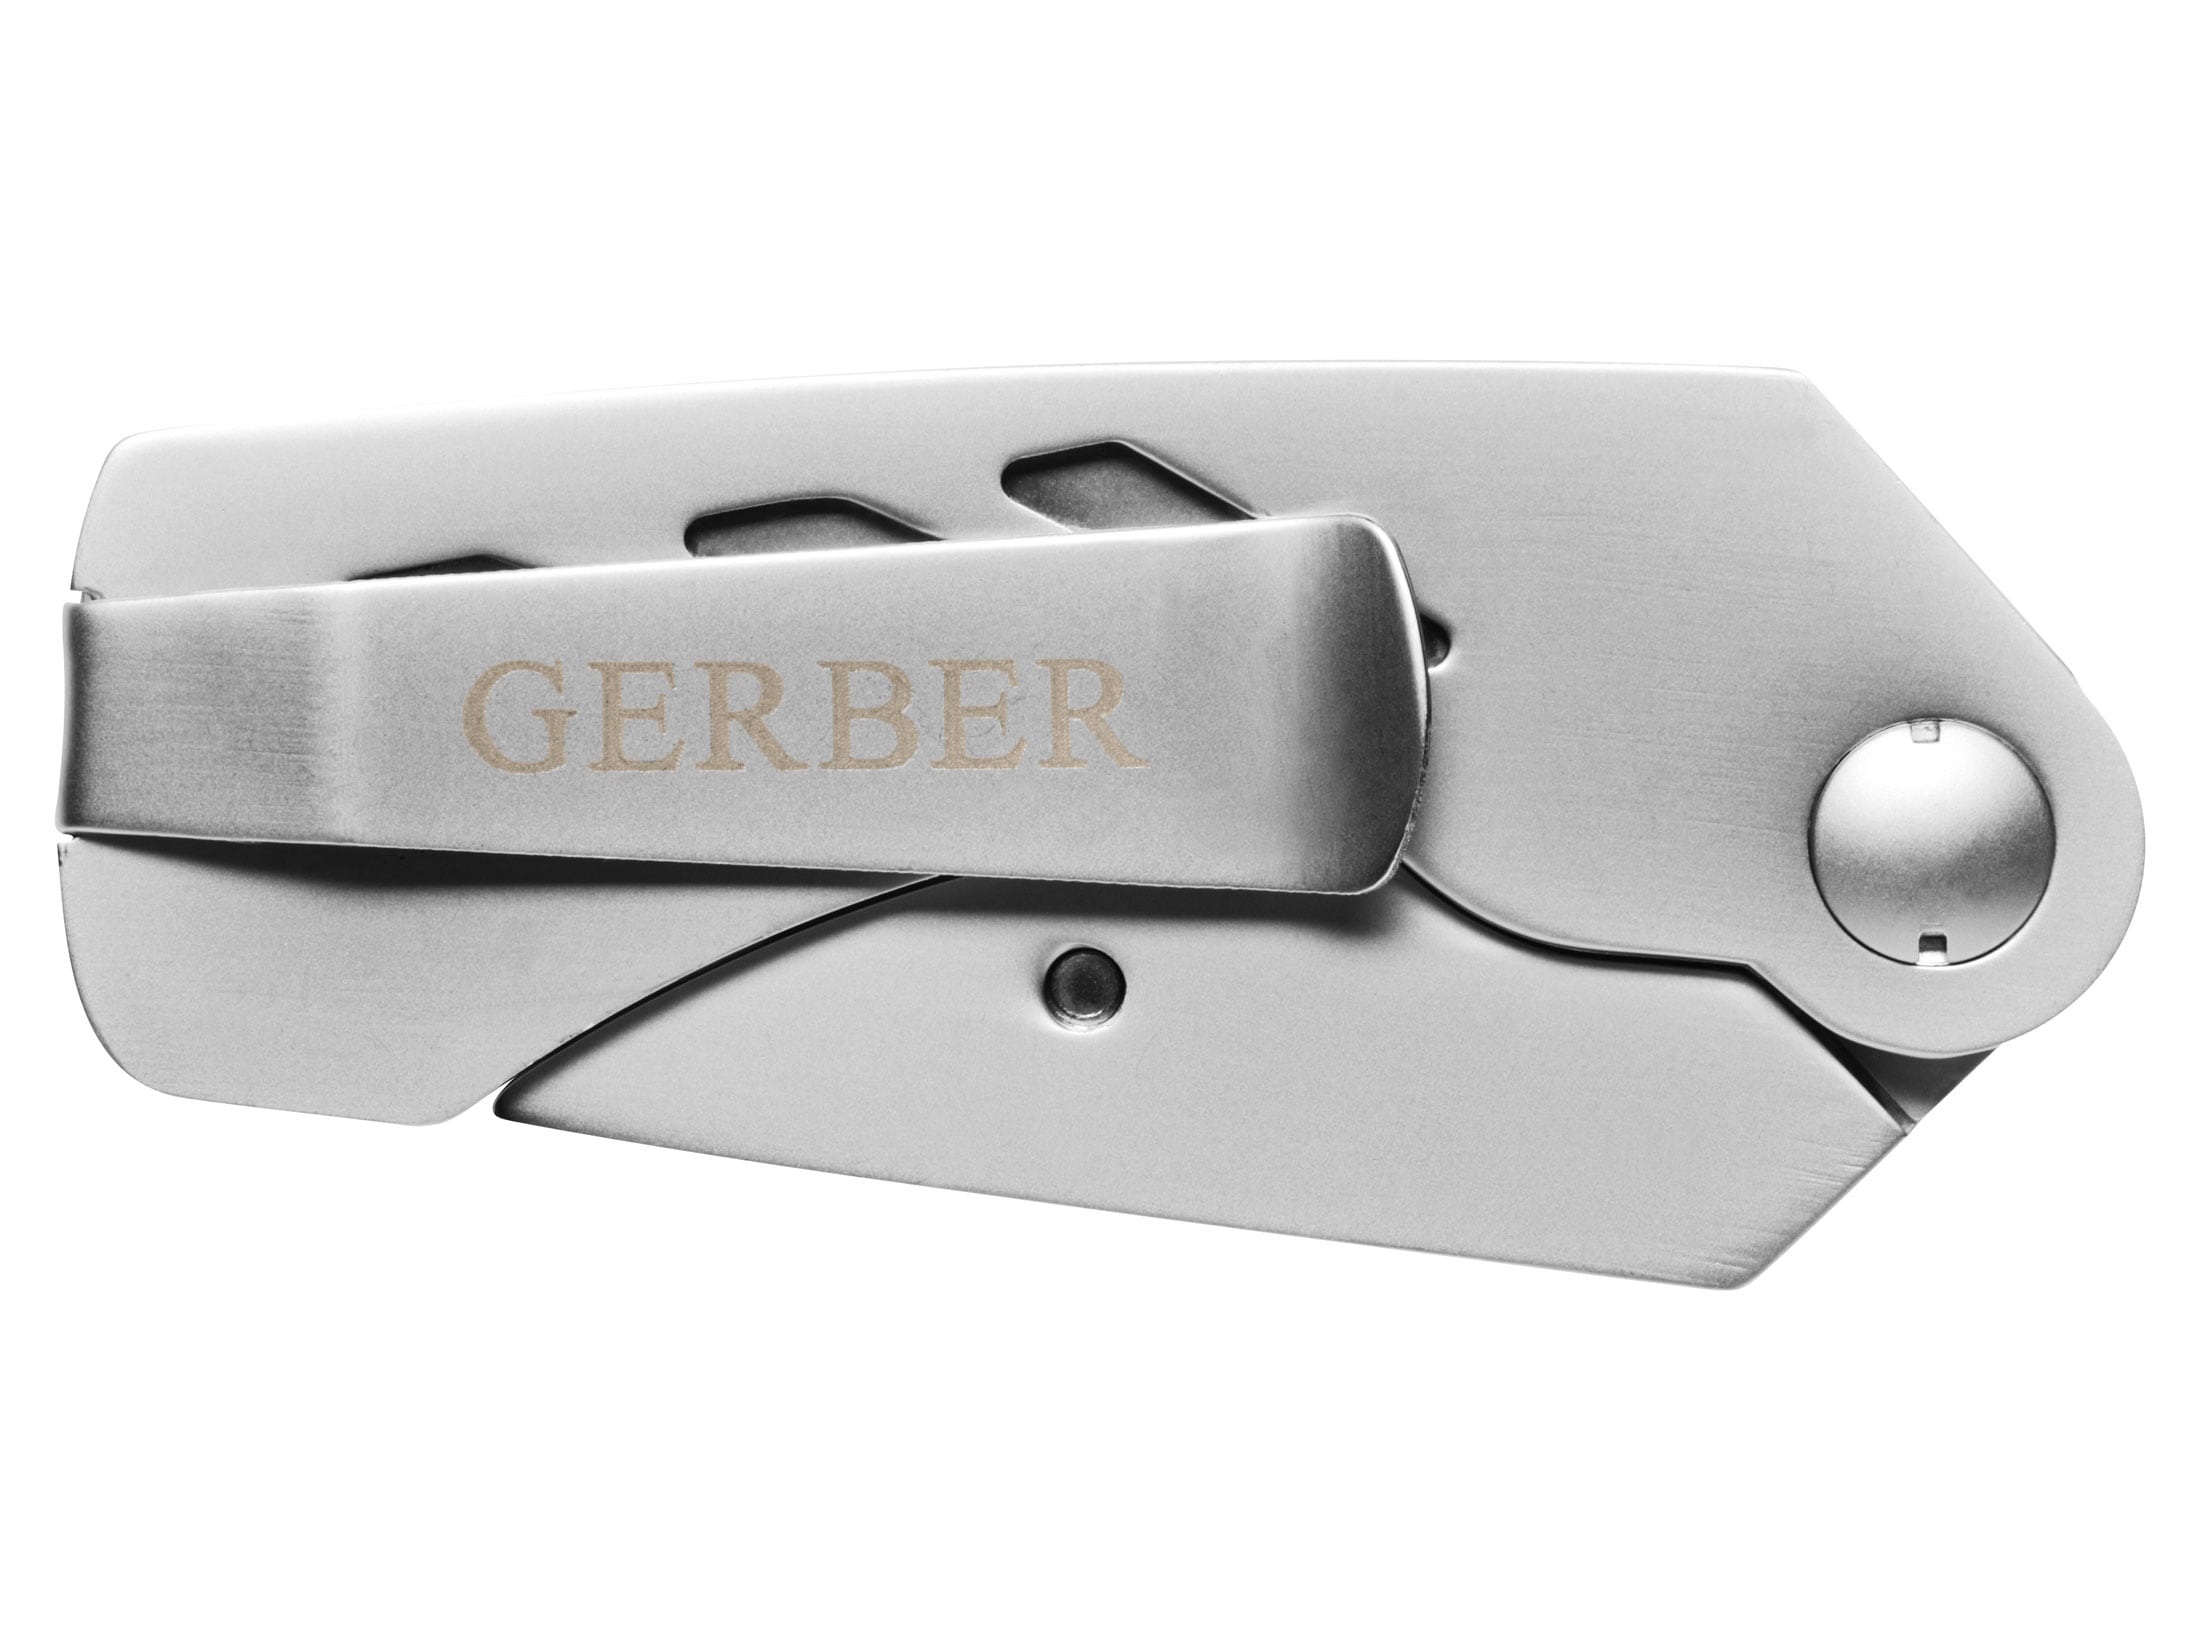 Gerber E.A.B. Lite Utility Knife 1.5″ Replaceable Utility Blade Stainless Steel Handle For Sale